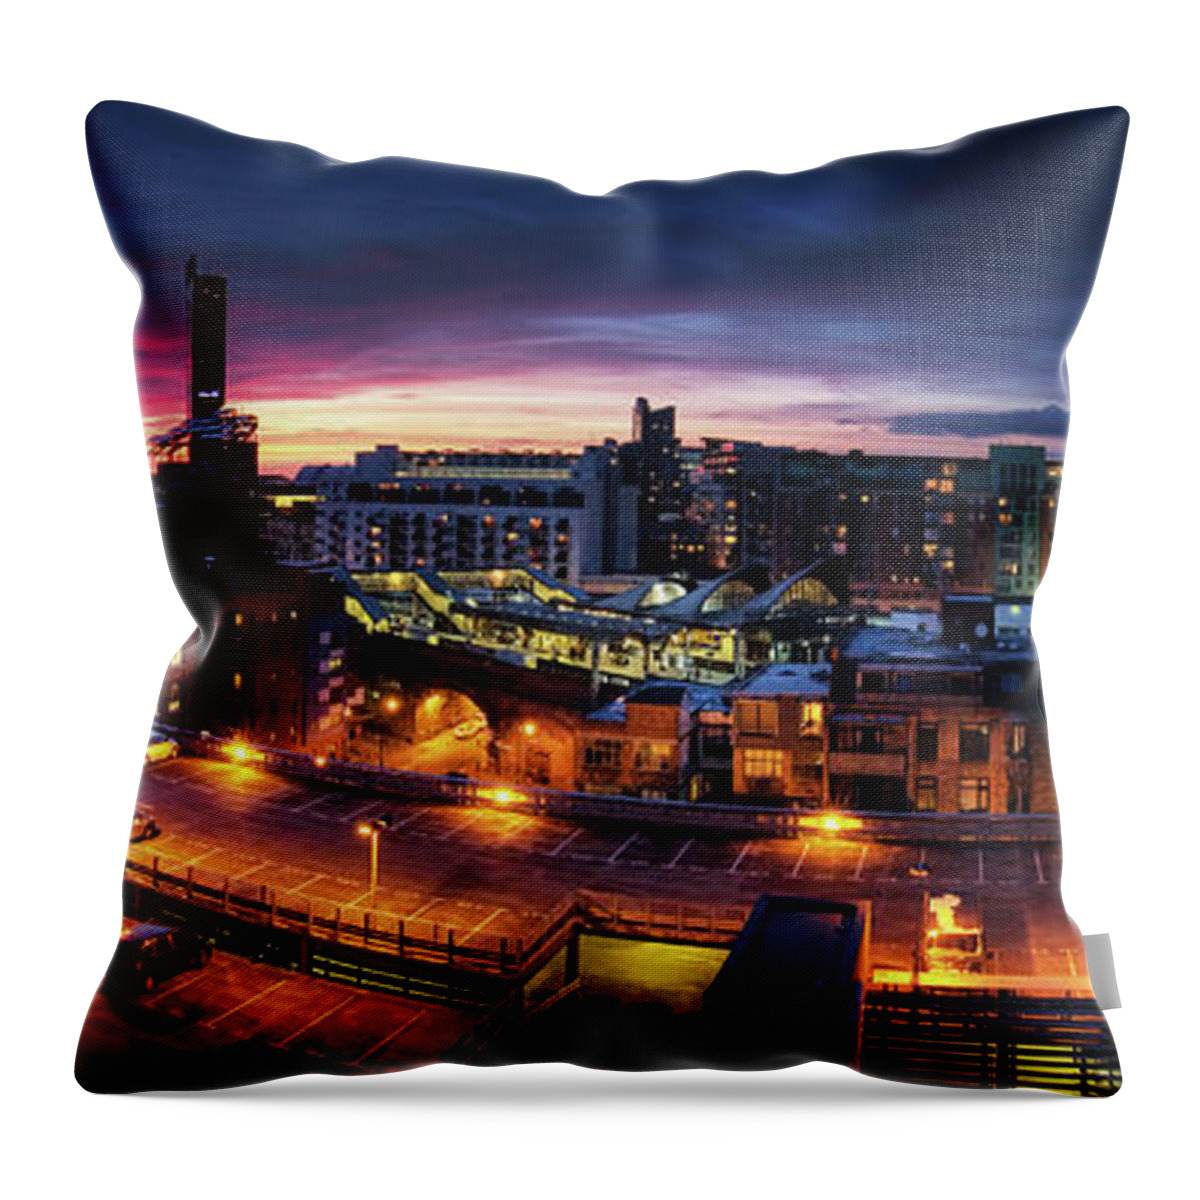 Tranquility Throw Pillow featuring the photograph Manchester, Uk, Panorama by Mike Plunkett